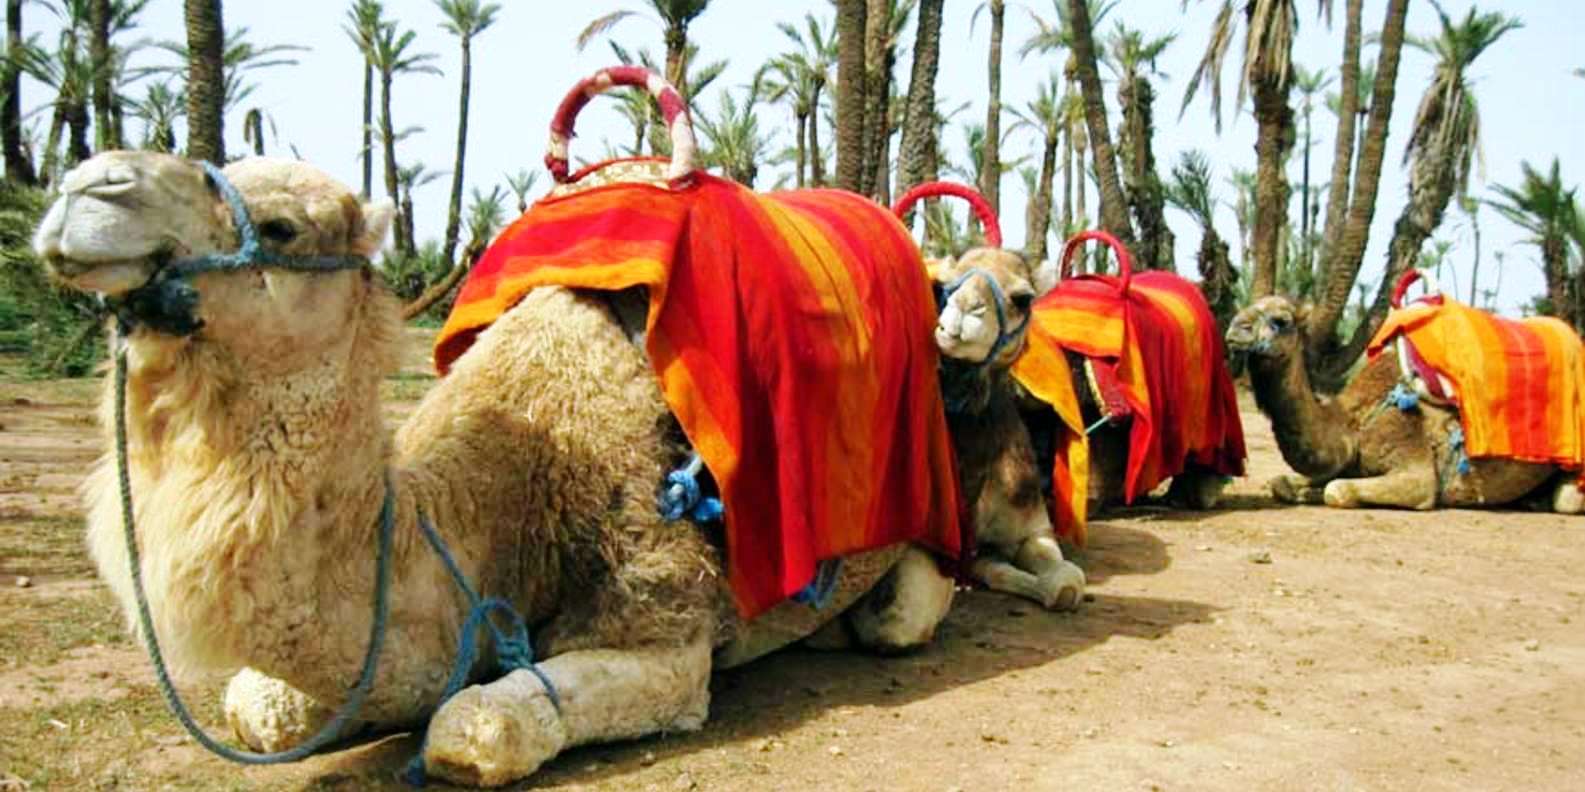 Morocco camel ride tours to explore the palm groves of Marrakech